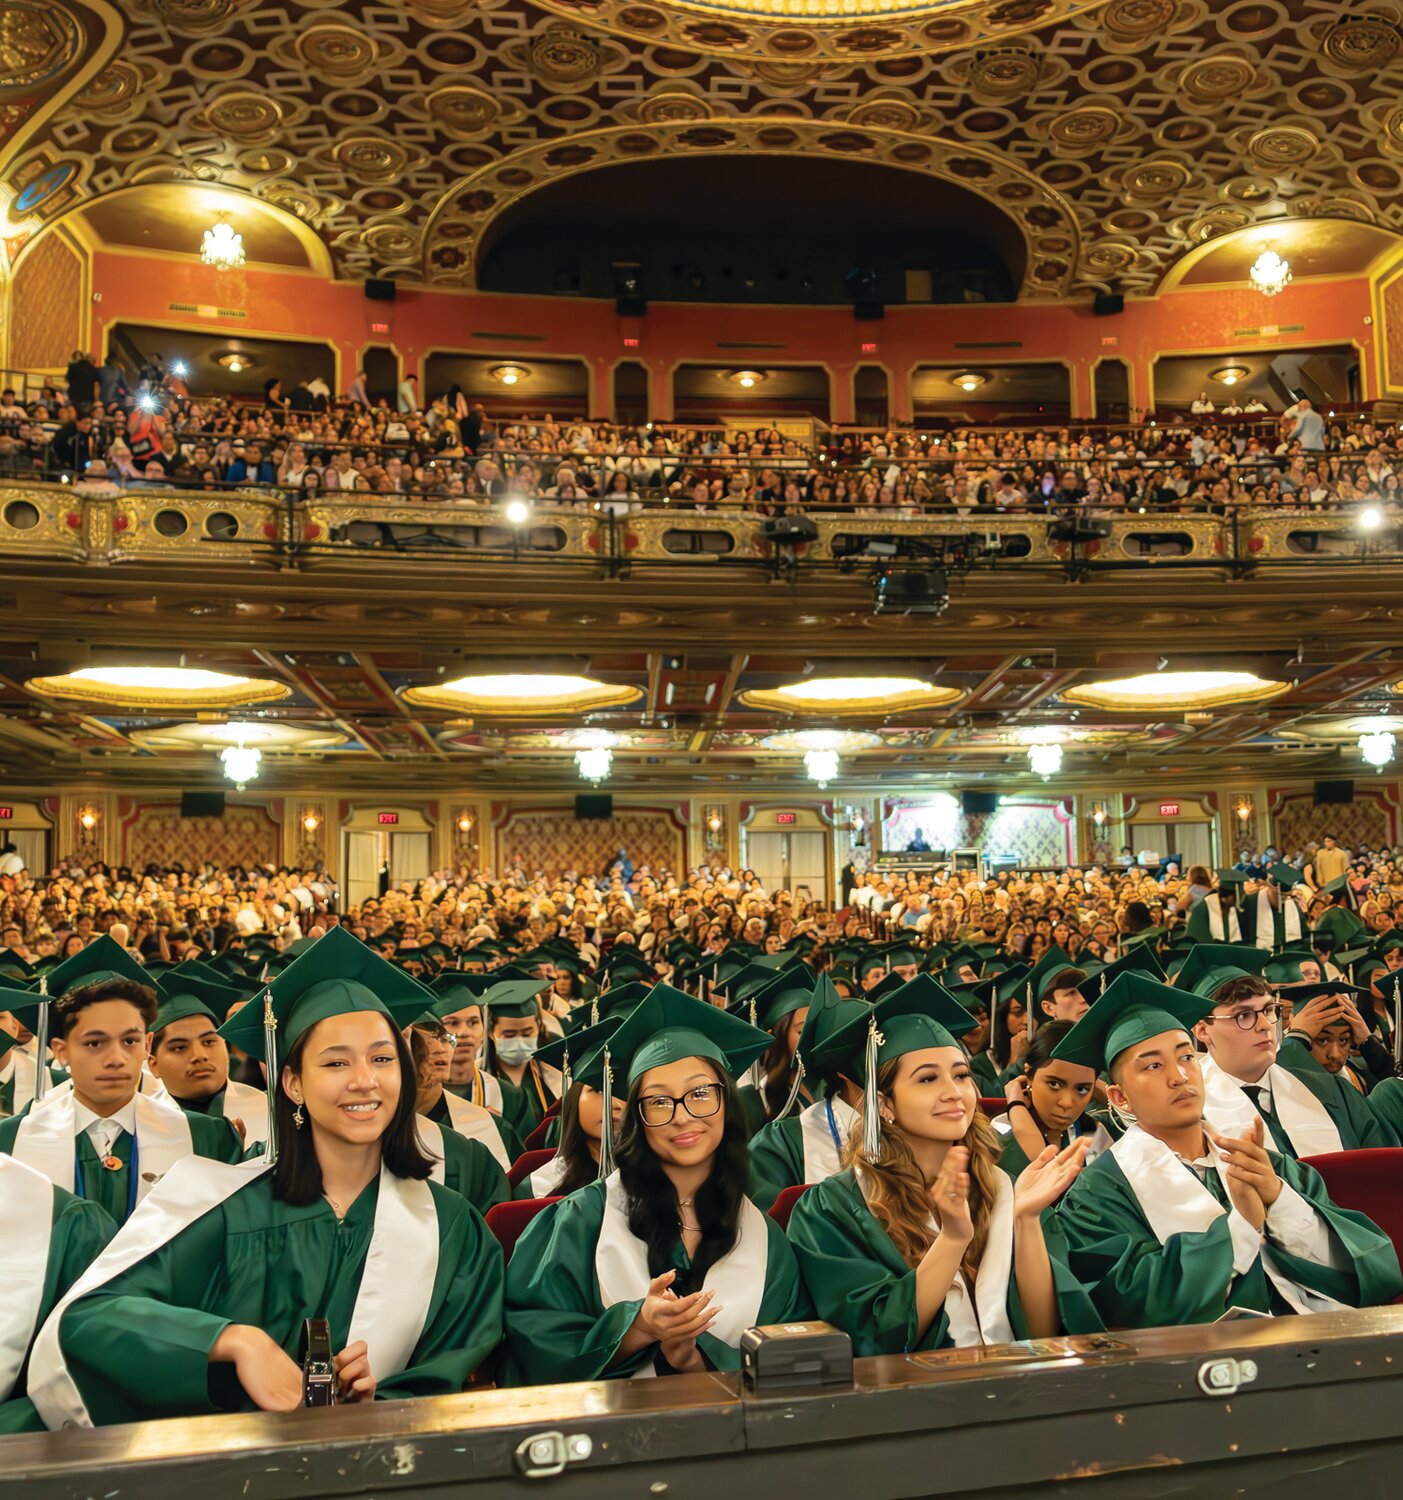 EXCITEMENT RISING: Soon to be graduates of Cranston High School East excitedly clap for the opening ceremonies that will end with them holding their diplomas. (Photo by Stephanie Bernaba)